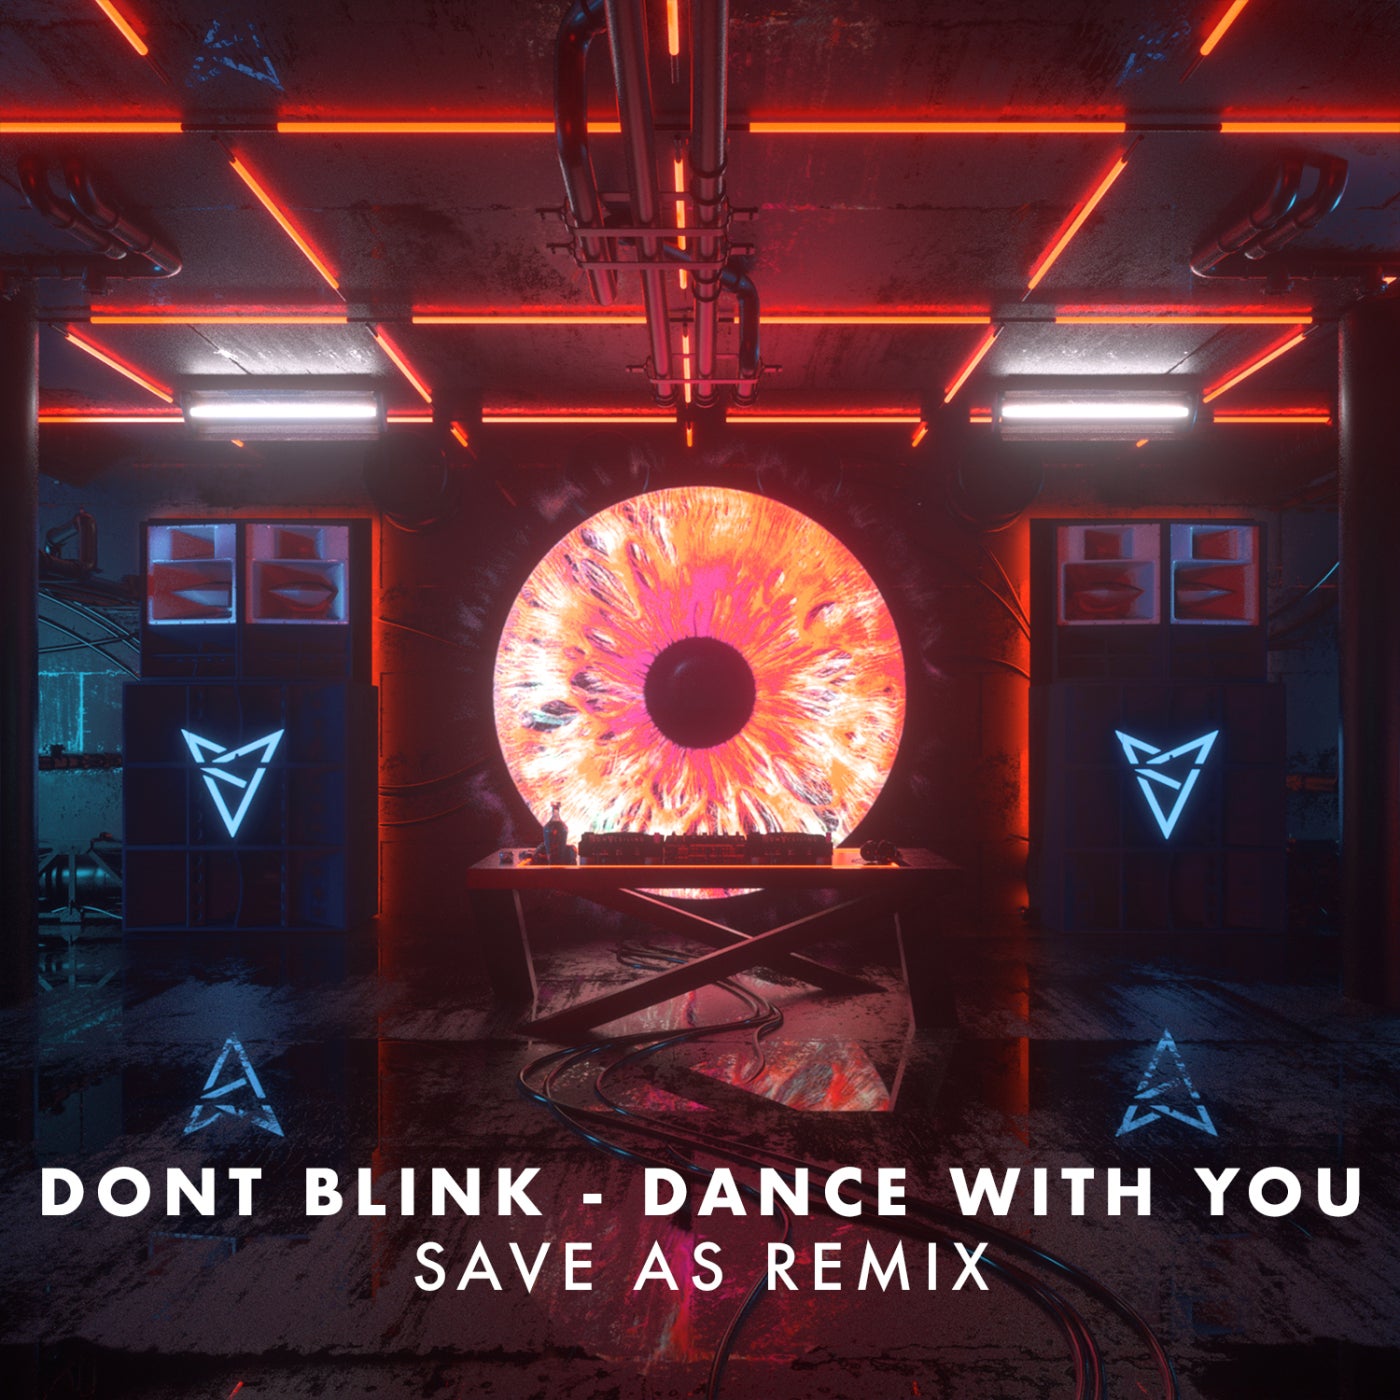 DANCE WITH YOU (Save As Remix)